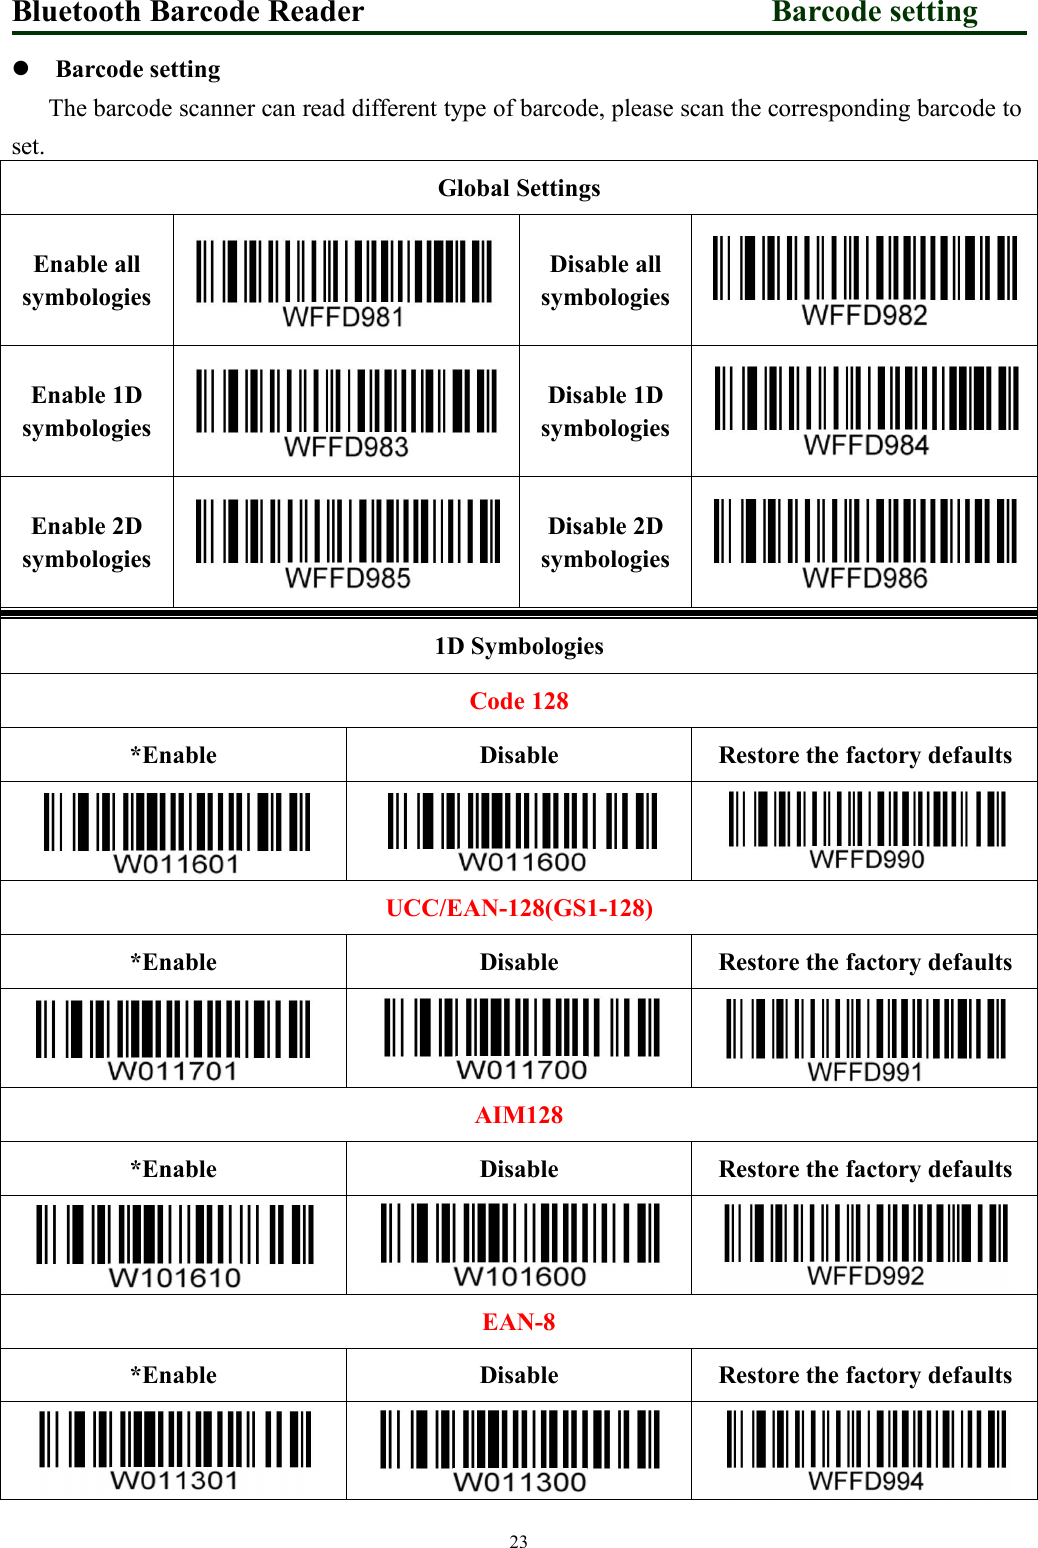 Bluetooth Barcode Reader Barcode setting23Barcode settingThe barcode scanner can read different type of barcode, please scan the corresponding barcode toset.Global SettingsEnable allsymbologiesDisable allsymbologiesEnable 1DsymbologiesDisable 1DsymbologiesEnable 2DsymbologiesDisable 2Dsymbologies1D SymbologiesCode 128*EnableDisableRestore the factory defaultsUCC/EAN-128(GS1-128)*EnableDisableRestore the factory defaultsAIM128*EnableDisableRestore the factory defaultsEAN-8*EnableDisableRestore the factory defaults